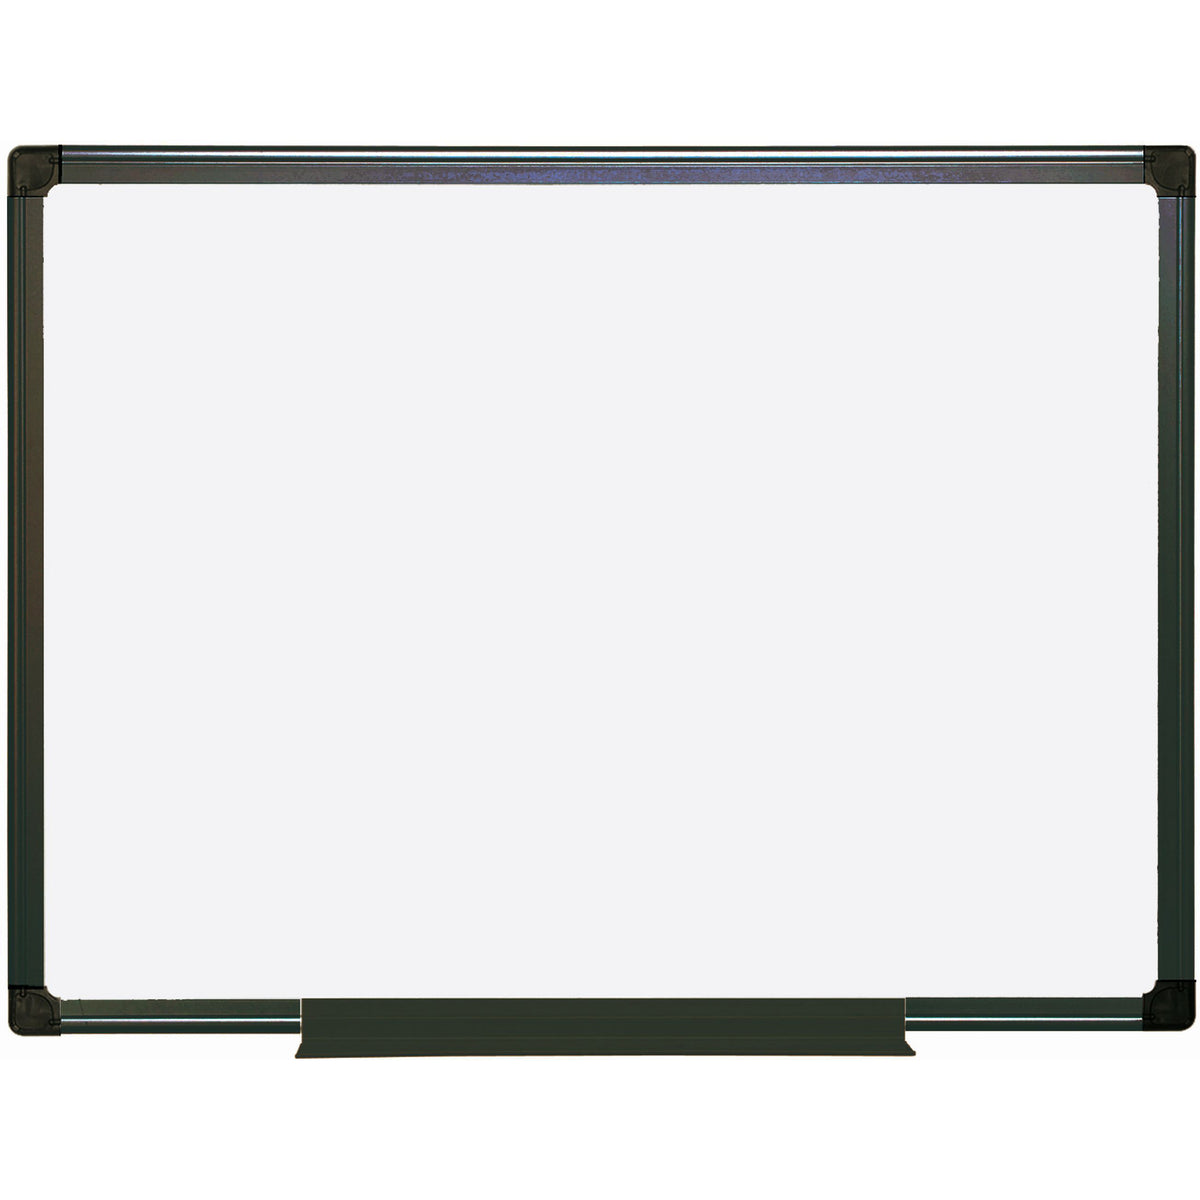 MB0712186 Maya Series Double Sided Melamine Dry Erase White Board with Snap-On Marker Tray, 24" x 36", Black Plastic Frame by MasterVision